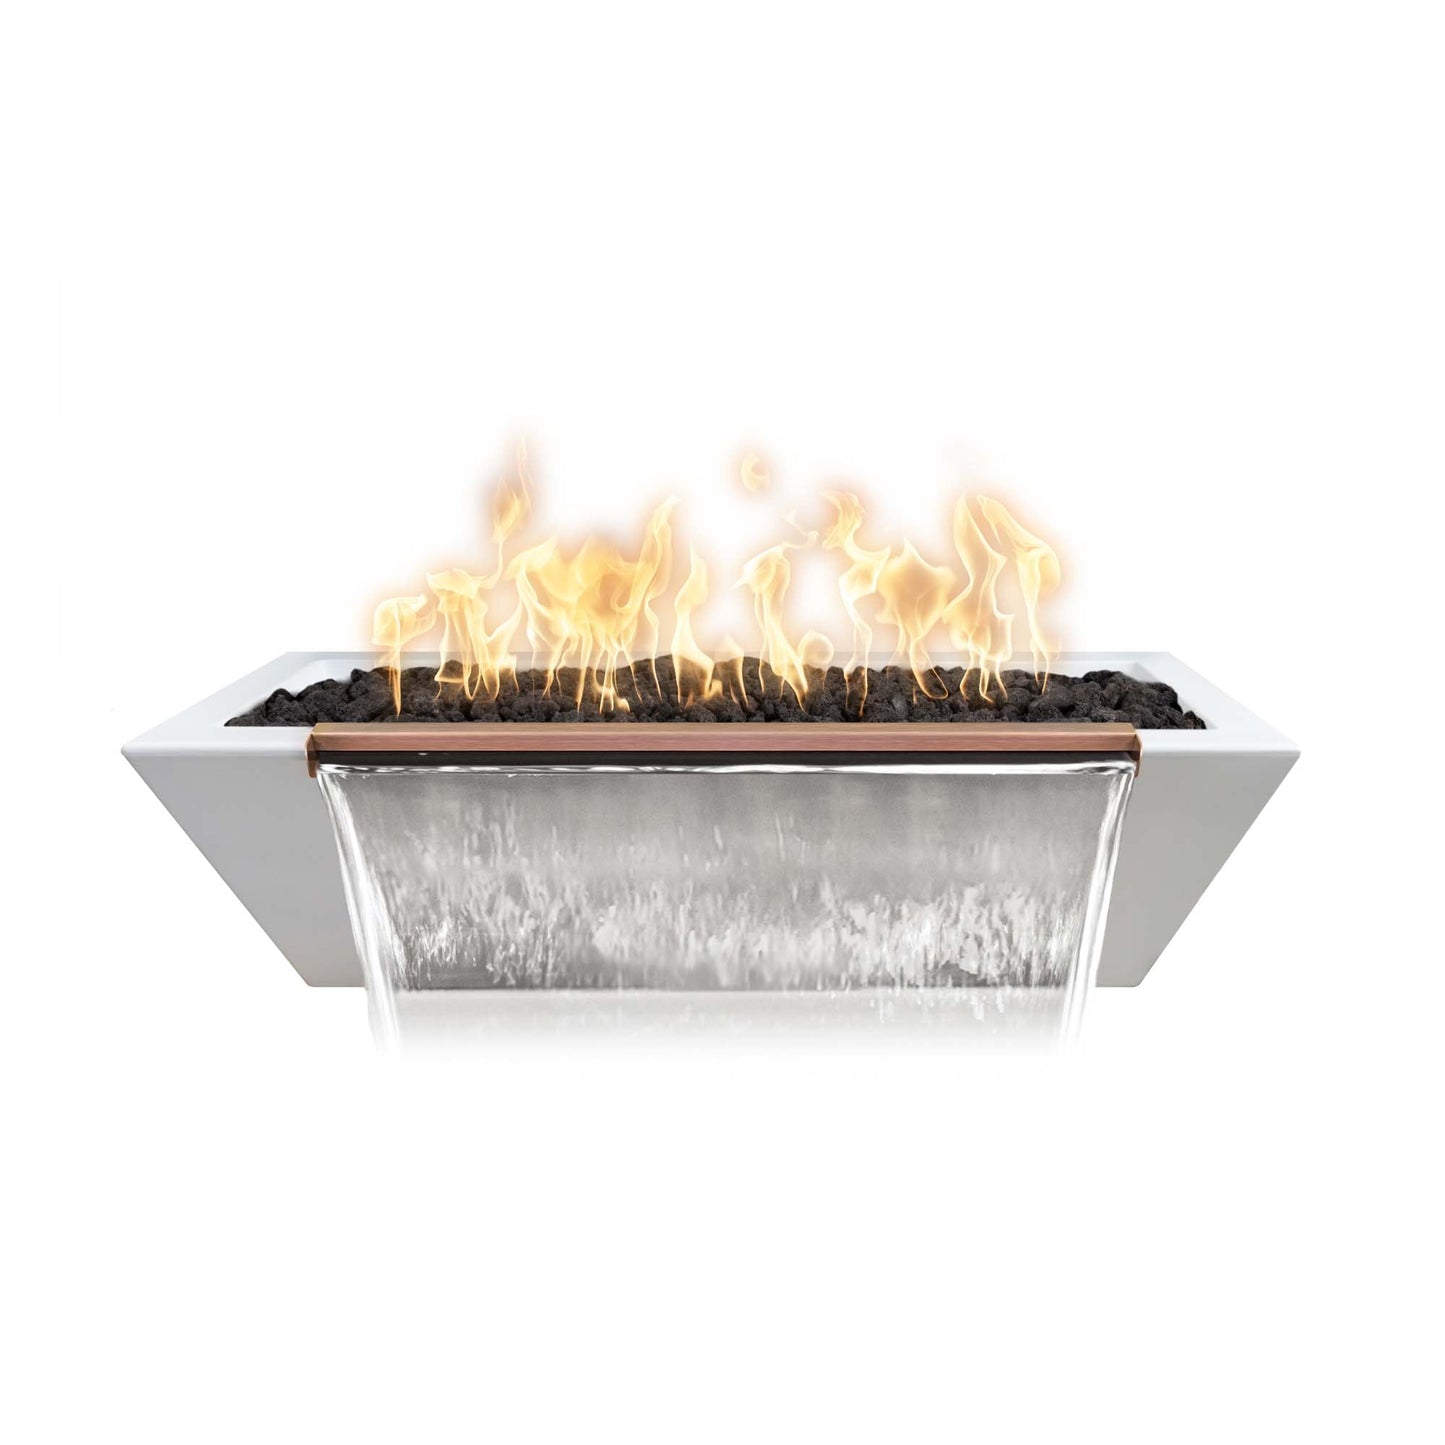 The Outdoor Plus Linear Maya 60" Chestnut GFRC Concrete Liquid Propane Fire & Water Bowl with 12V Electronic Ignition